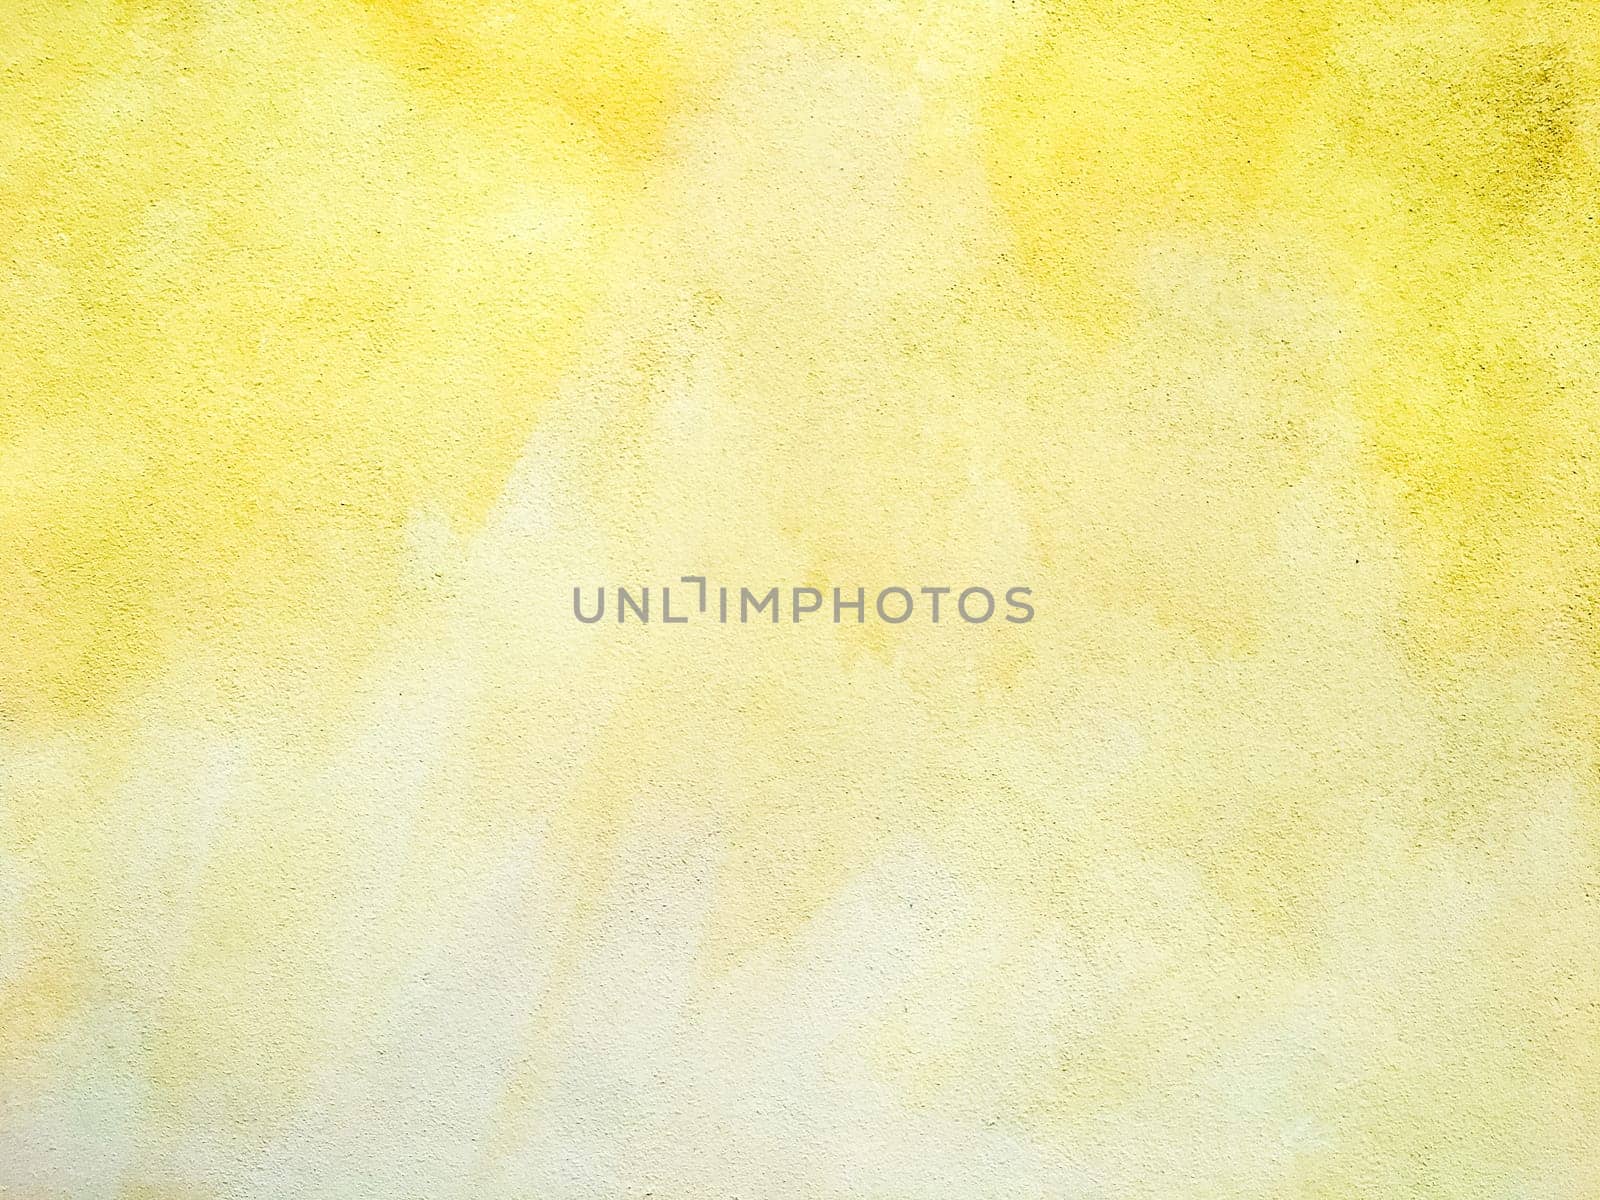 Concrete yellow colorful wall surface texture. Abstract grunge bright illuminating color background. Copyspace.